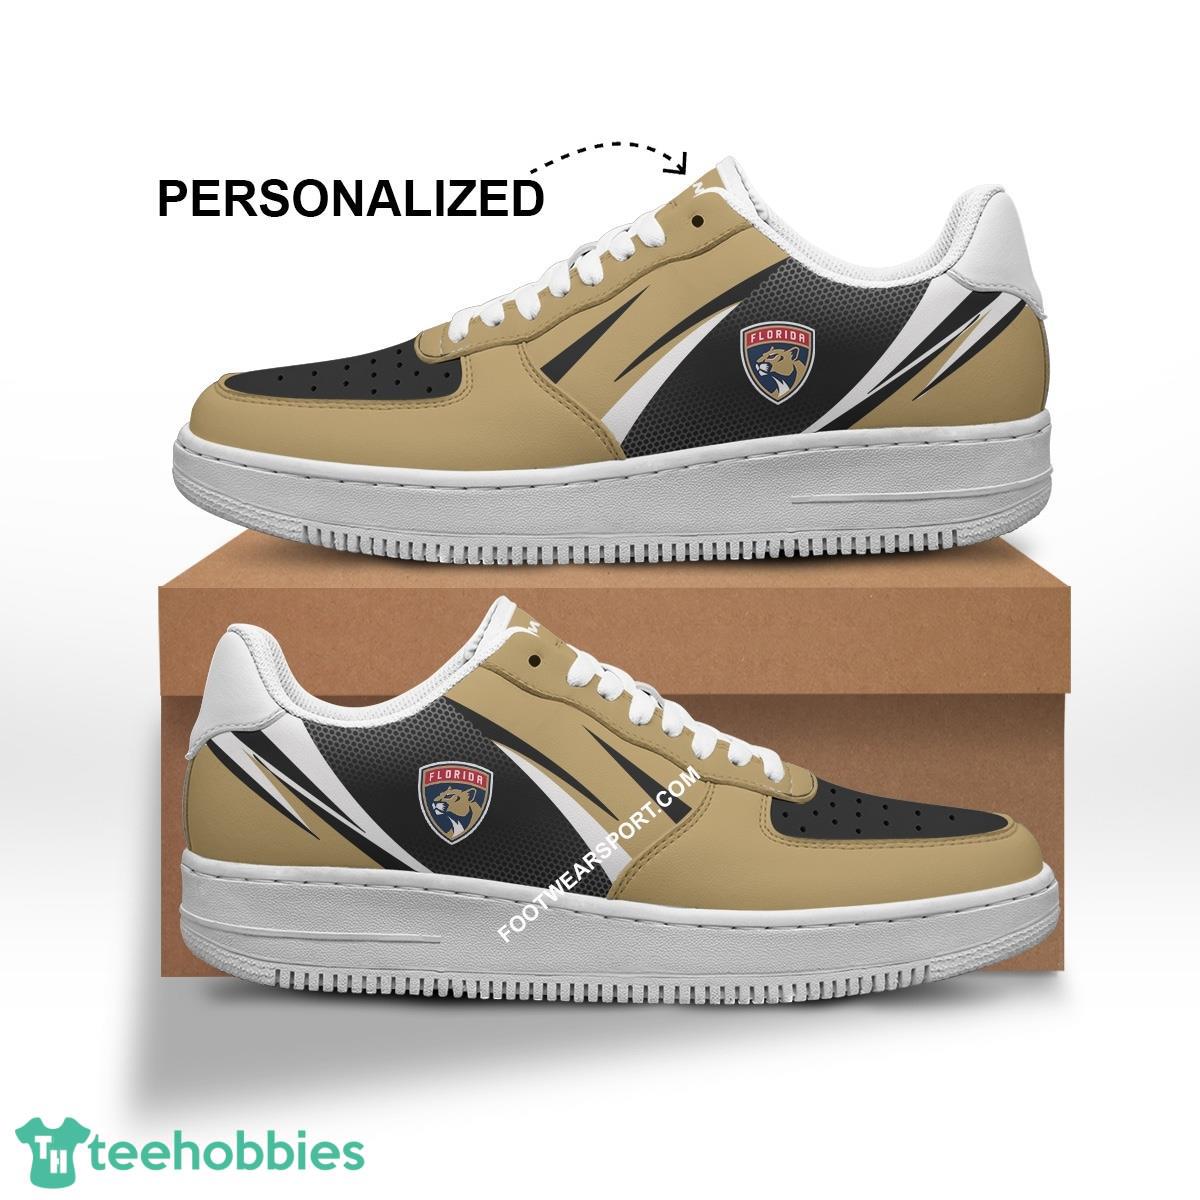 Custom Name Florida Panthers Air Force 1 Shoes Trending Design Gift For Men Women Fans - NHL Florida Panthers Air Force 1 Shoes Personalized Style 1